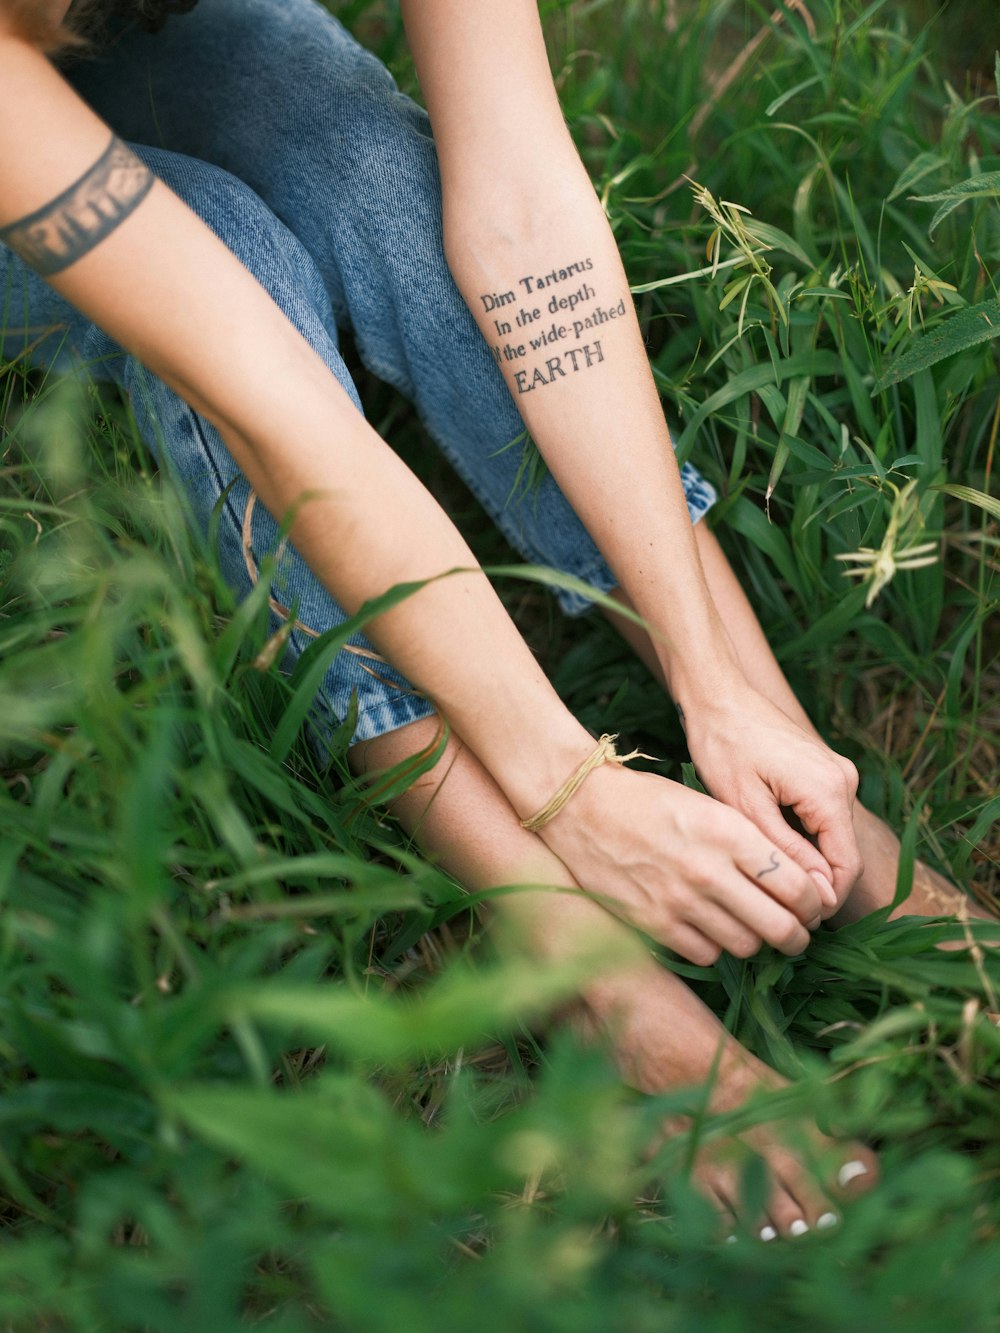 a woman with a tattoo on her arm sitting in the grass